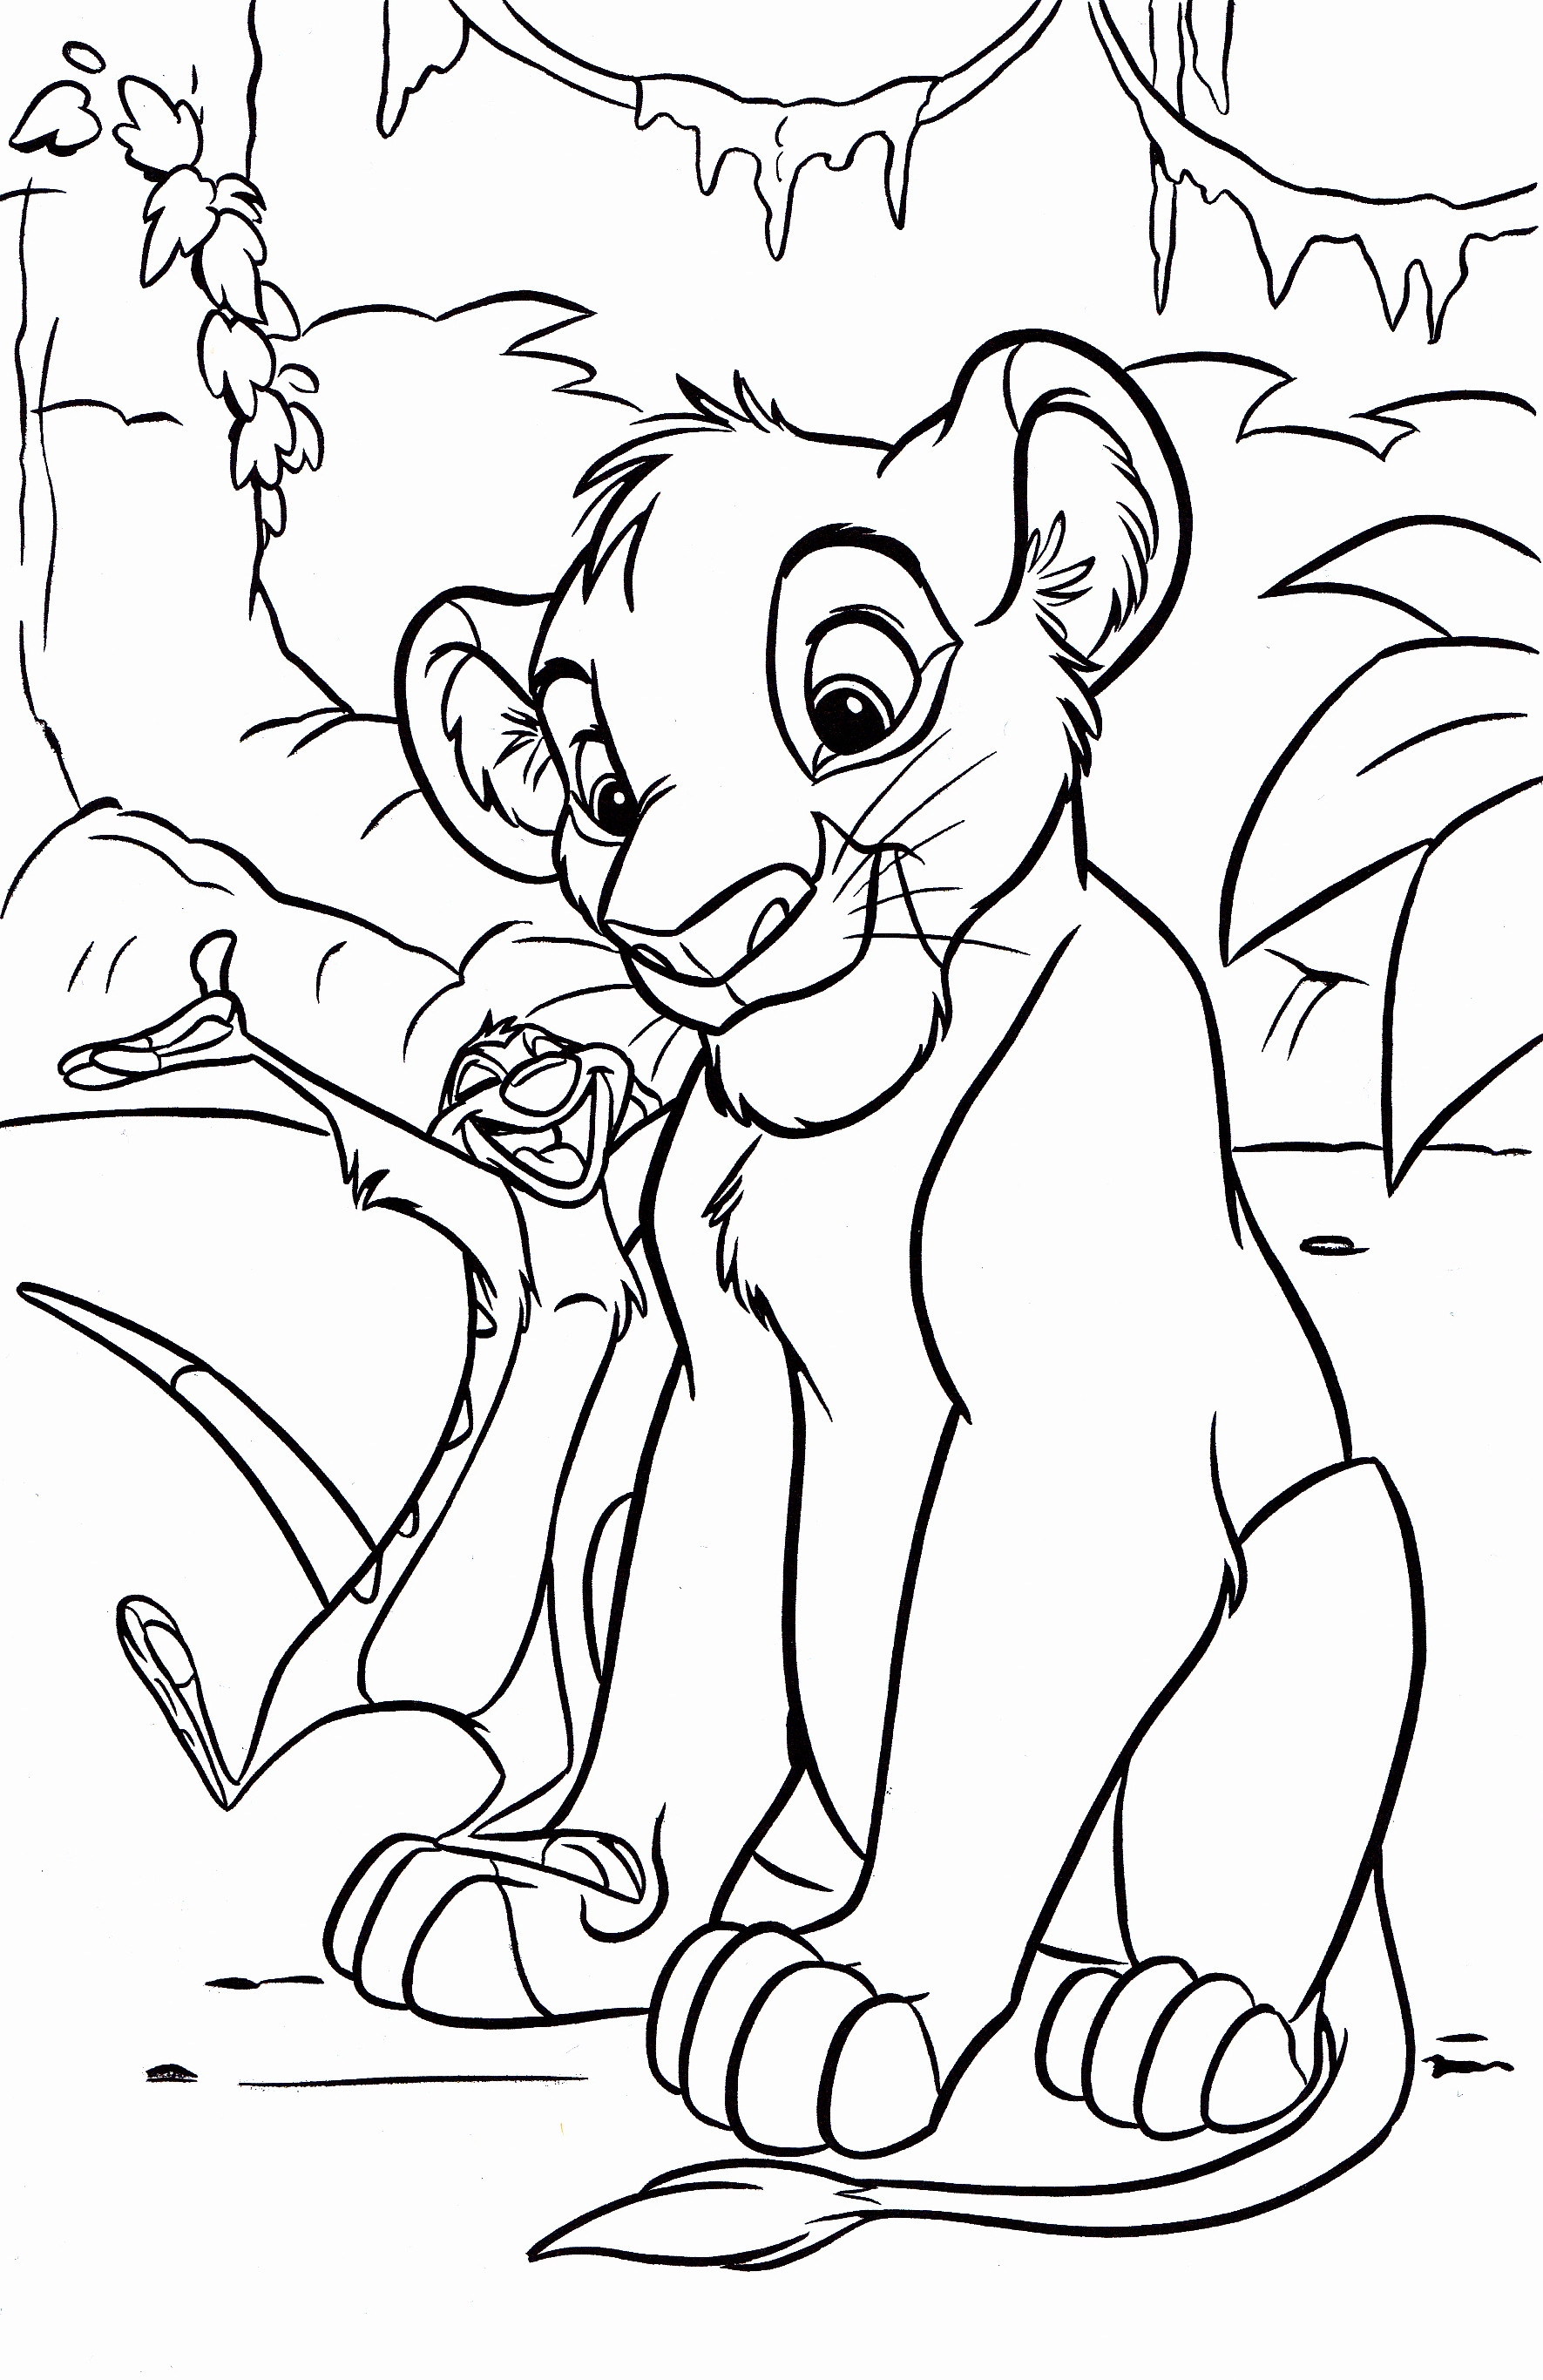 Disney Coloring Book
 Free Printable Simba Coloring Pages For Kids